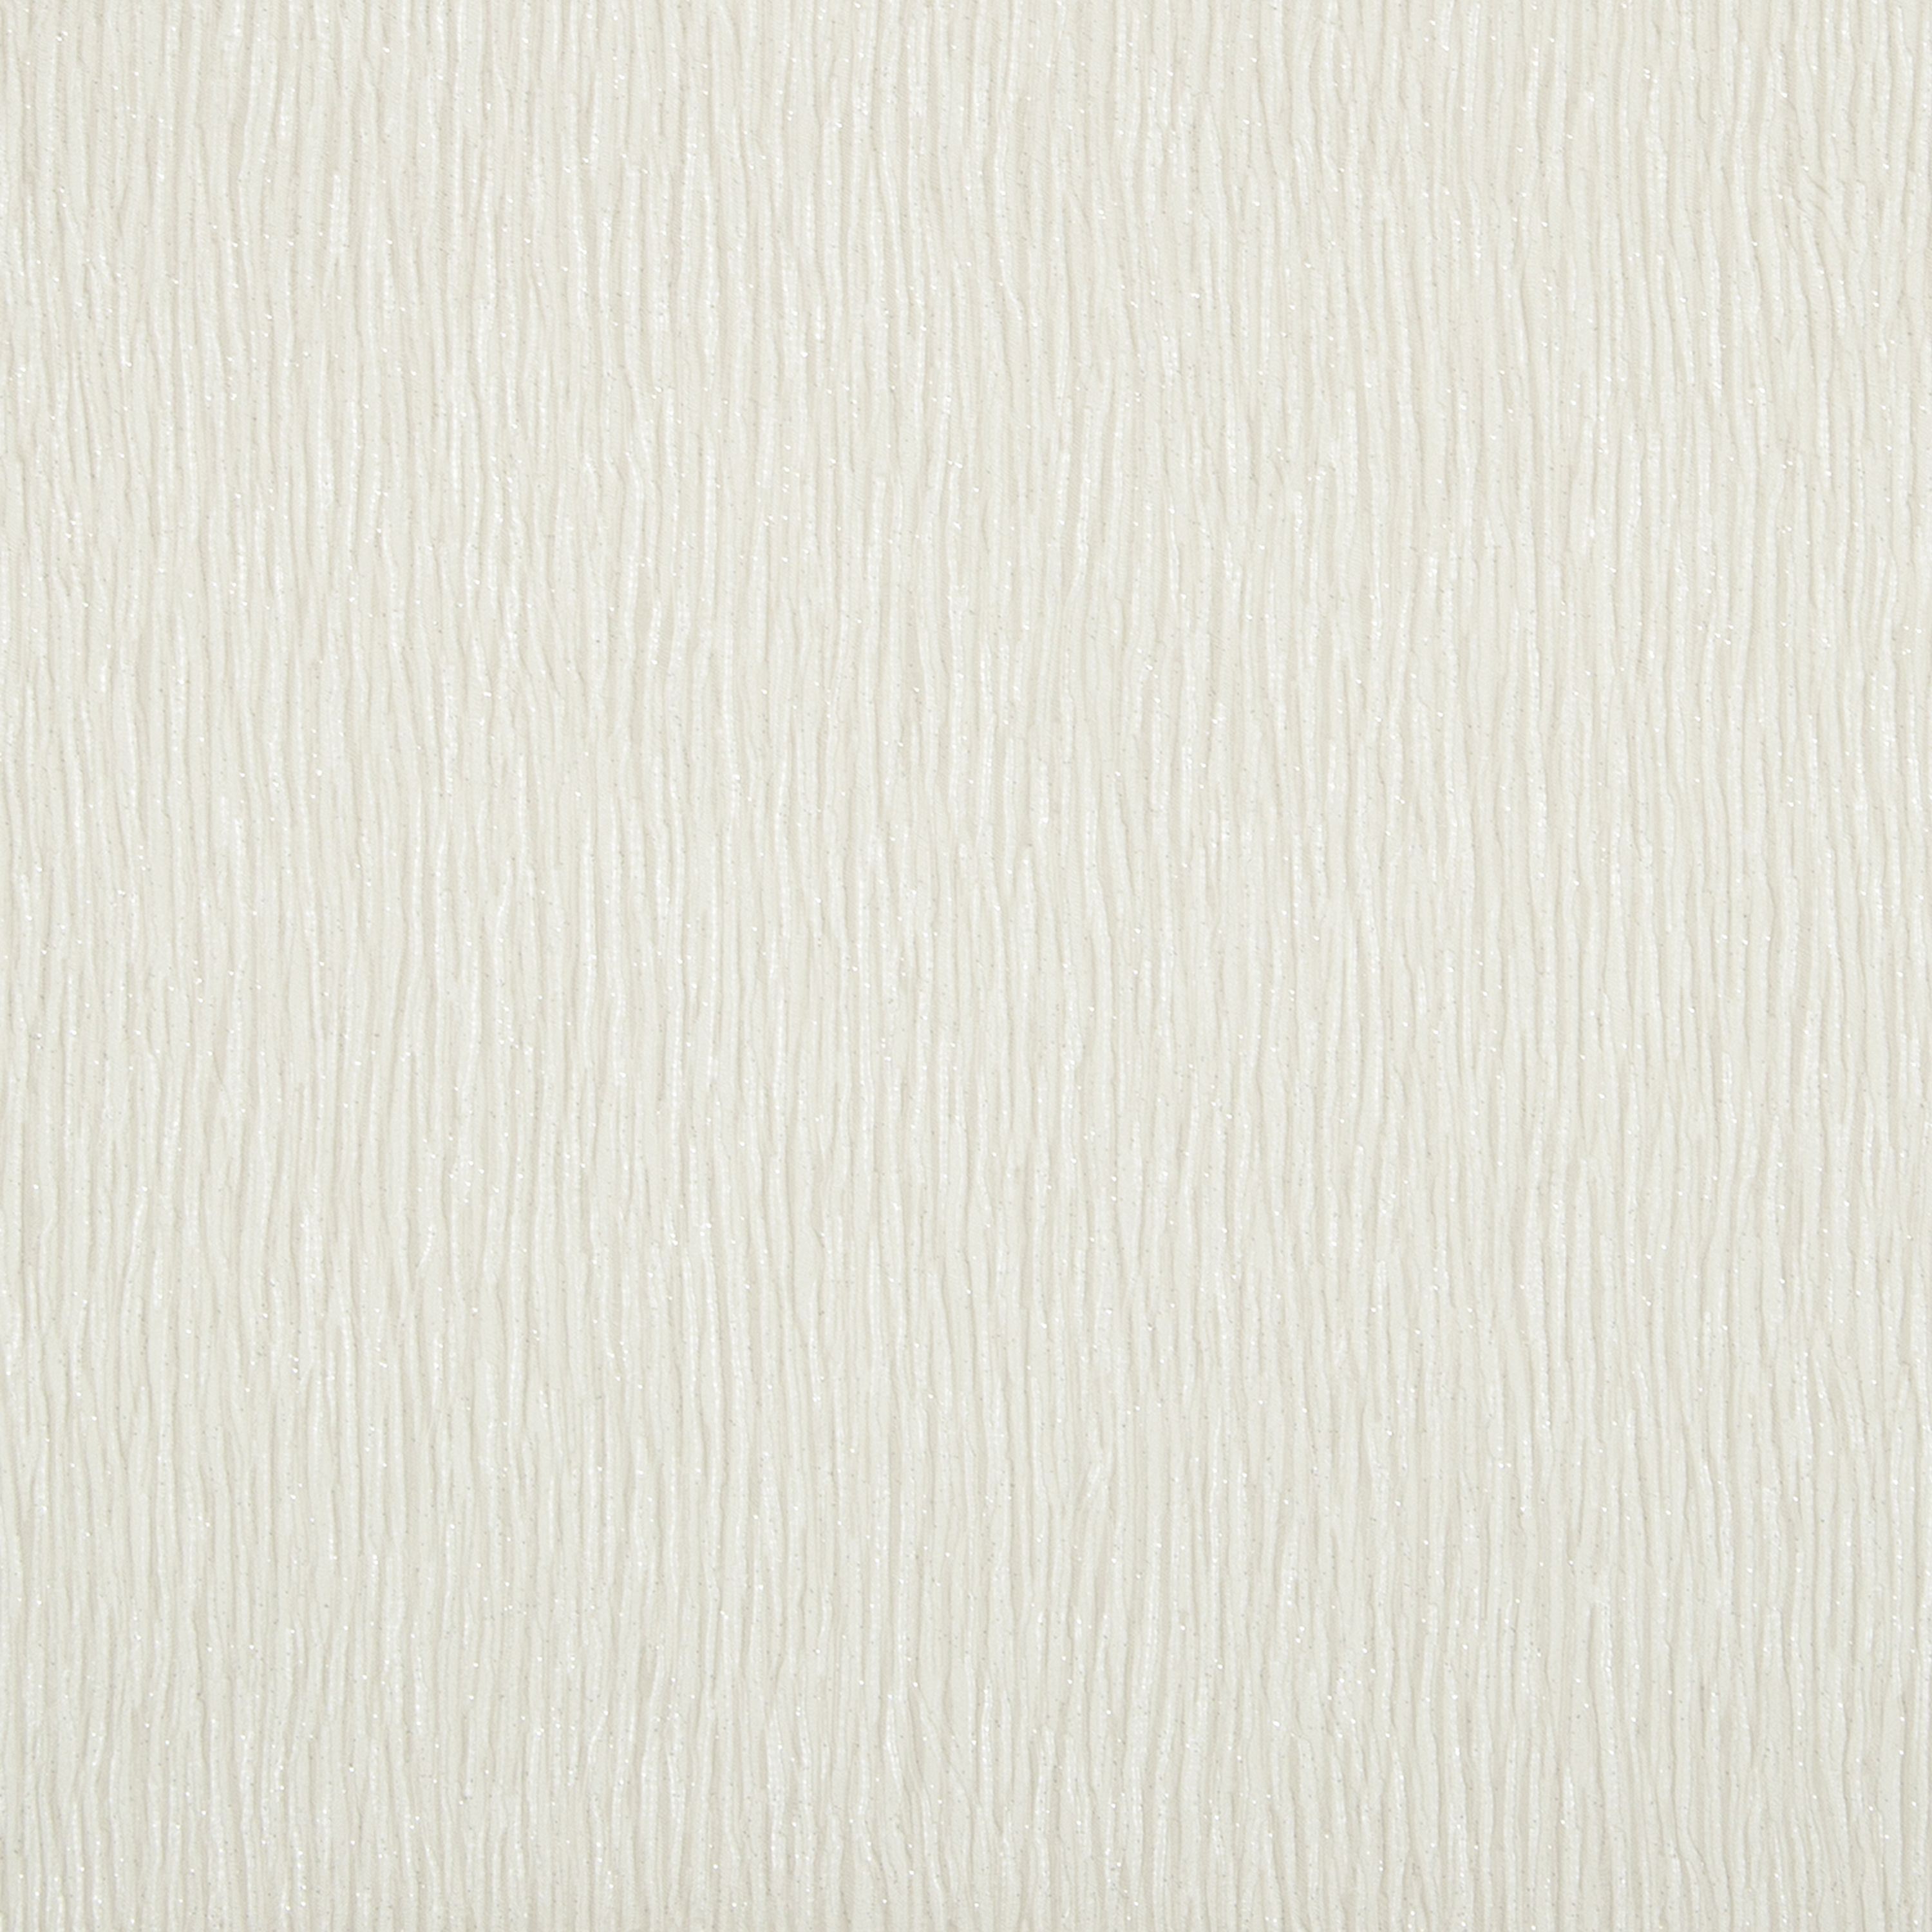 Boutique Shimmer Taupe Wave Metallic & glitter effect Textured Wallpaper Sample